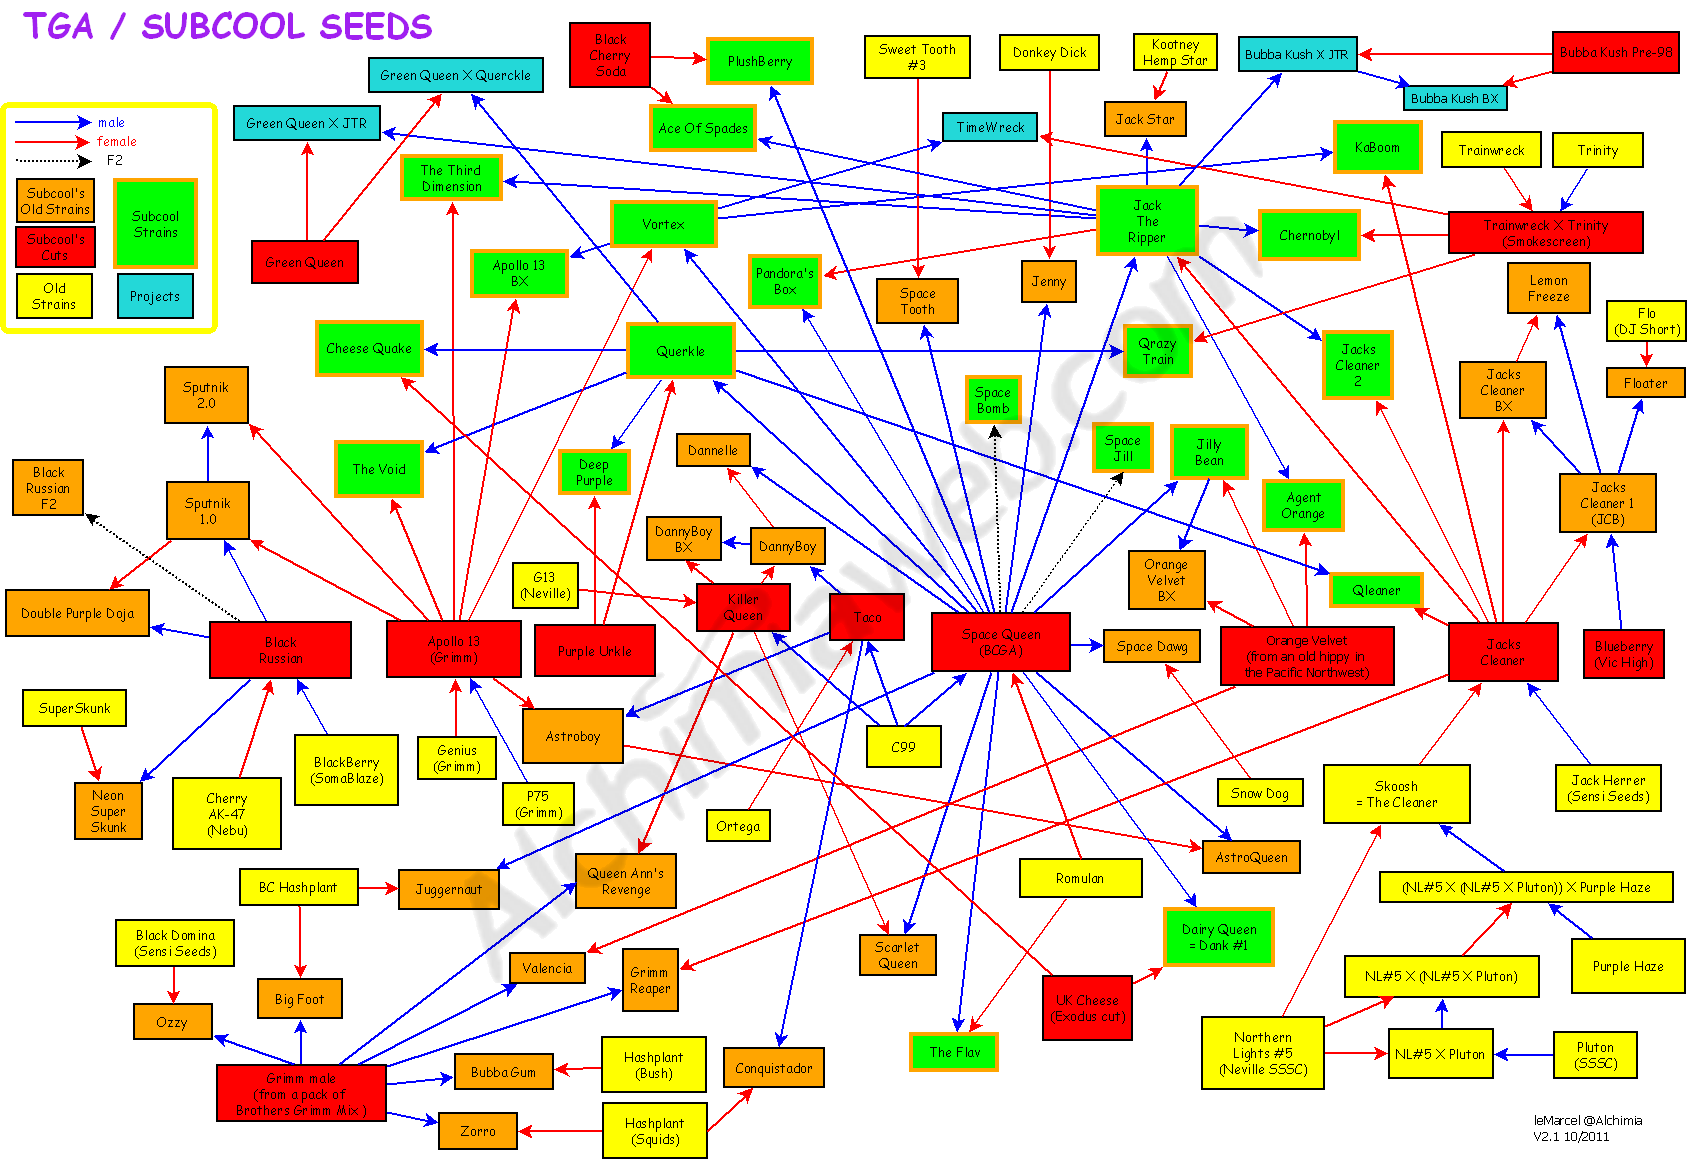 Family tree of Subcool's strains